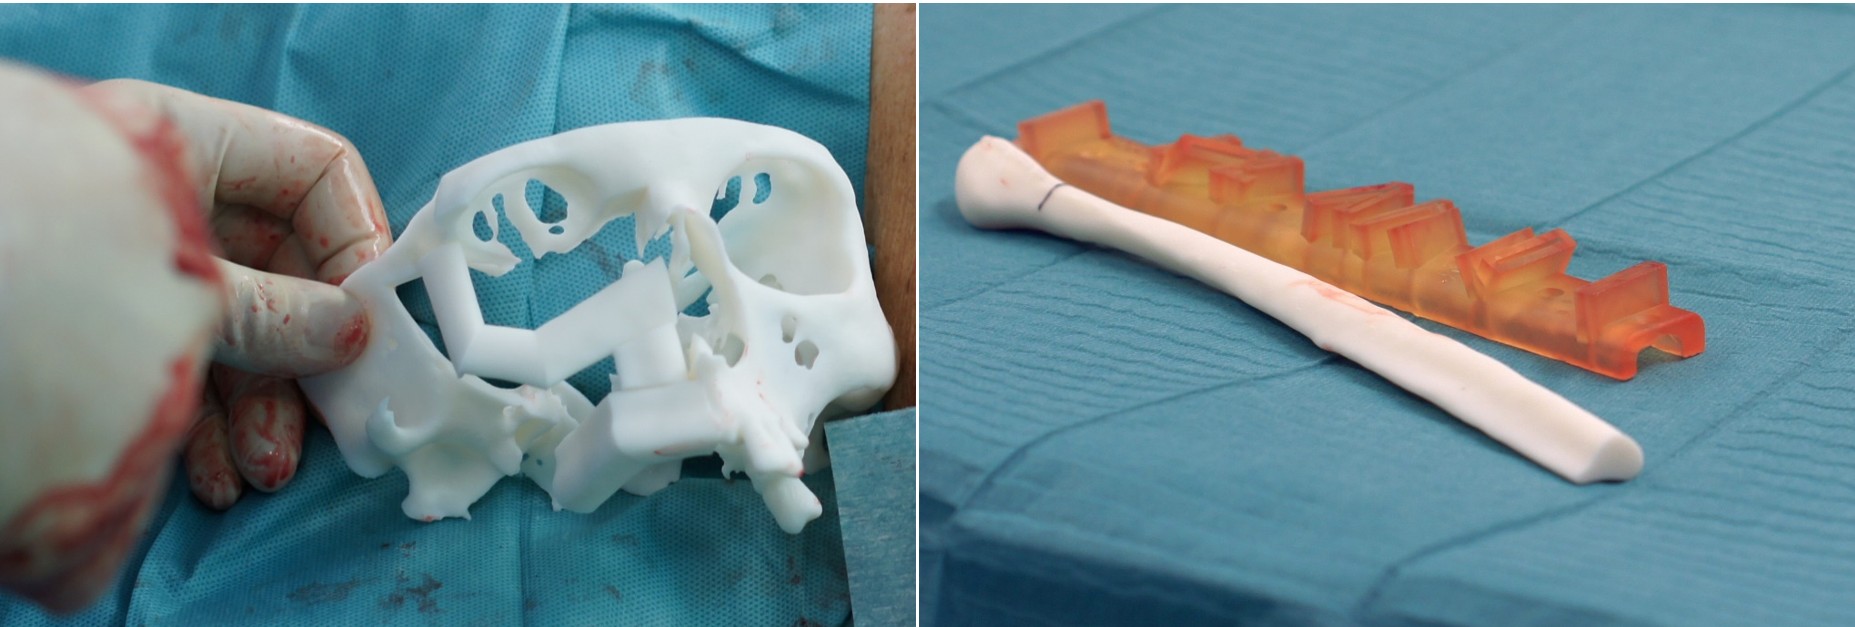 Fig. 2 Anatomial models with the surgical guide for the fibula osteotomies.